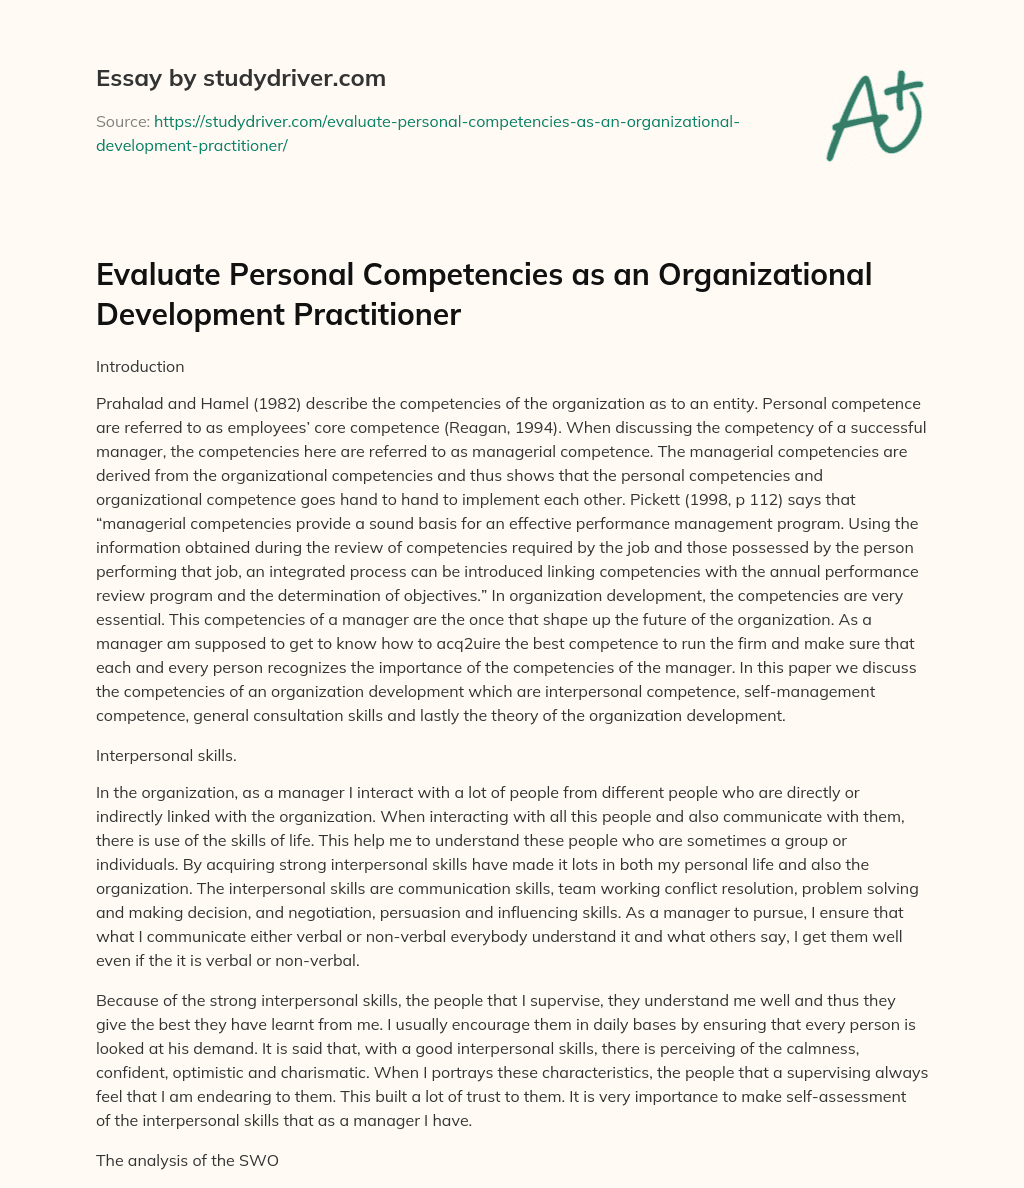 Evaluate Personal Competencies as an Organizational Development Practitioner essay